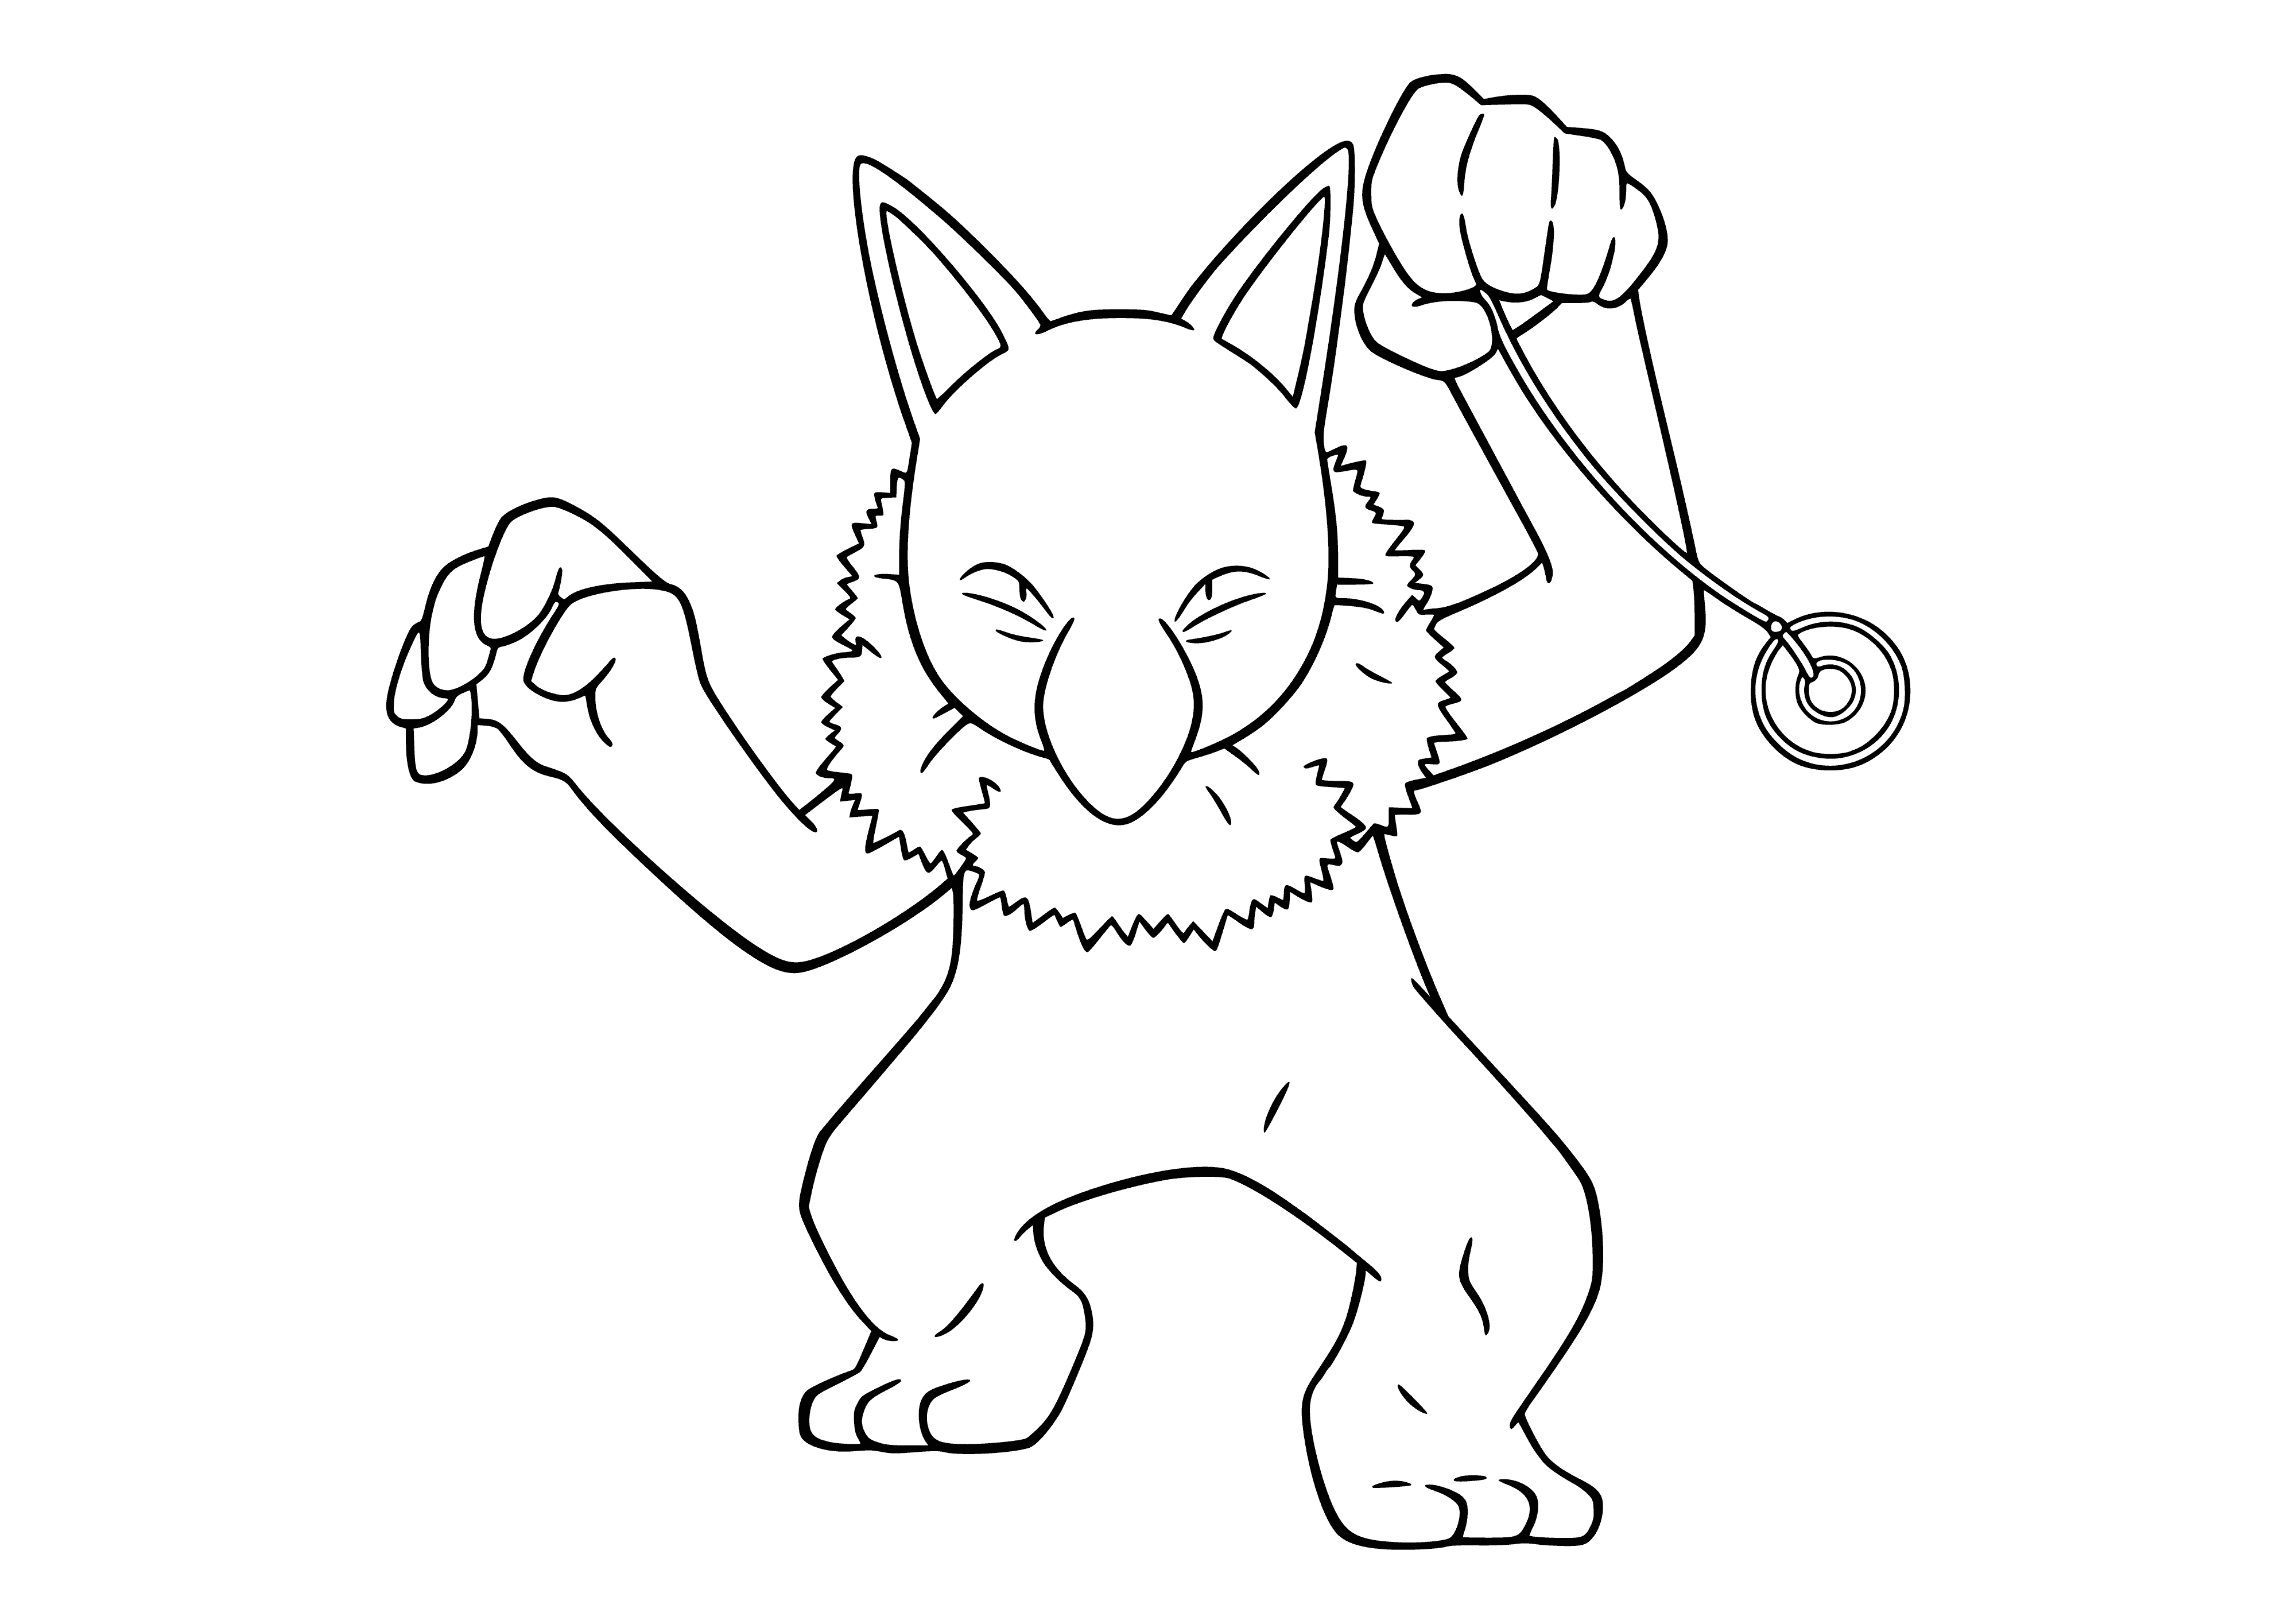 coloring page: Tall and thin Pokemon with long neck, large head, small mouth, and yellow eyes. Has 3 spots and black hands/feet. Tail ends in black, 4-pointed star.